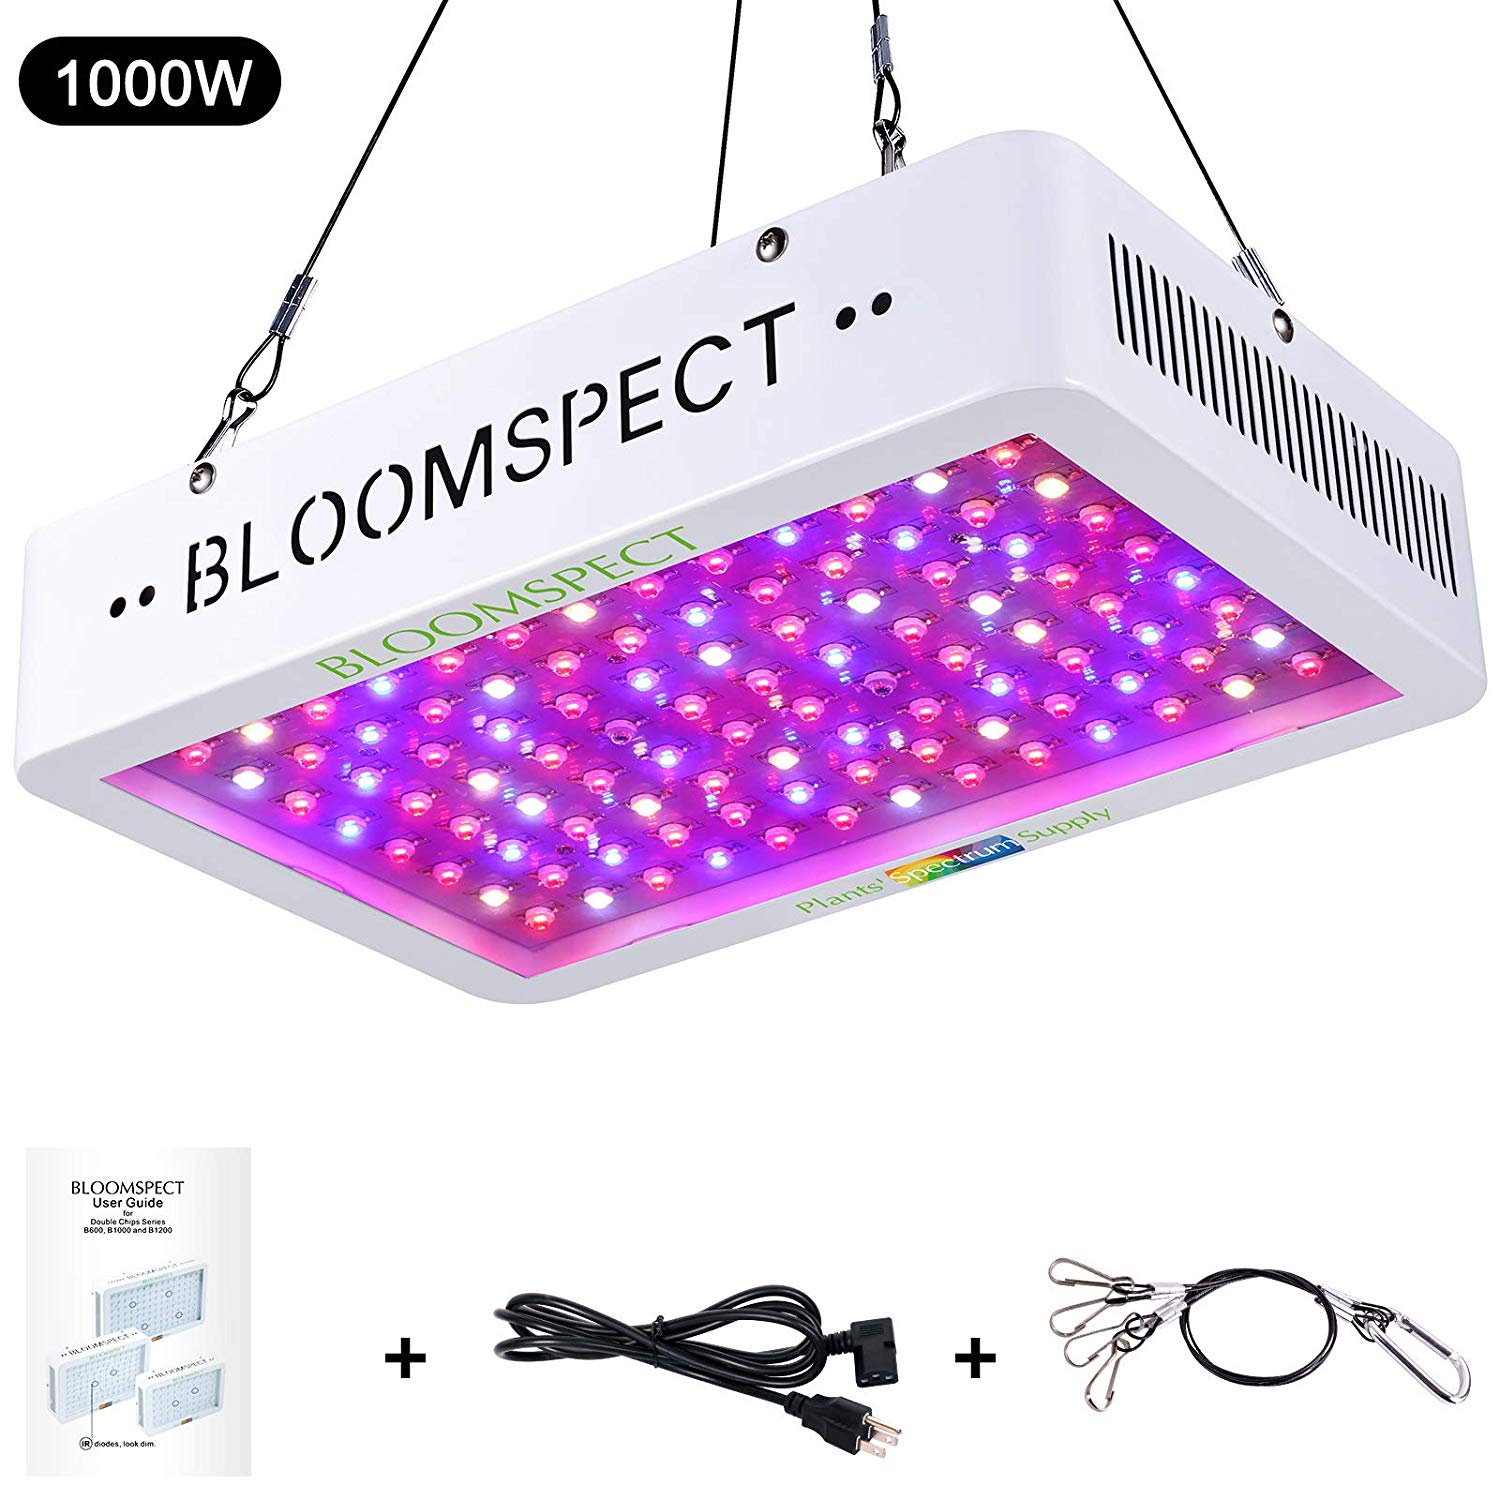 BLOOMSPECT 1000W LED Grow Lights